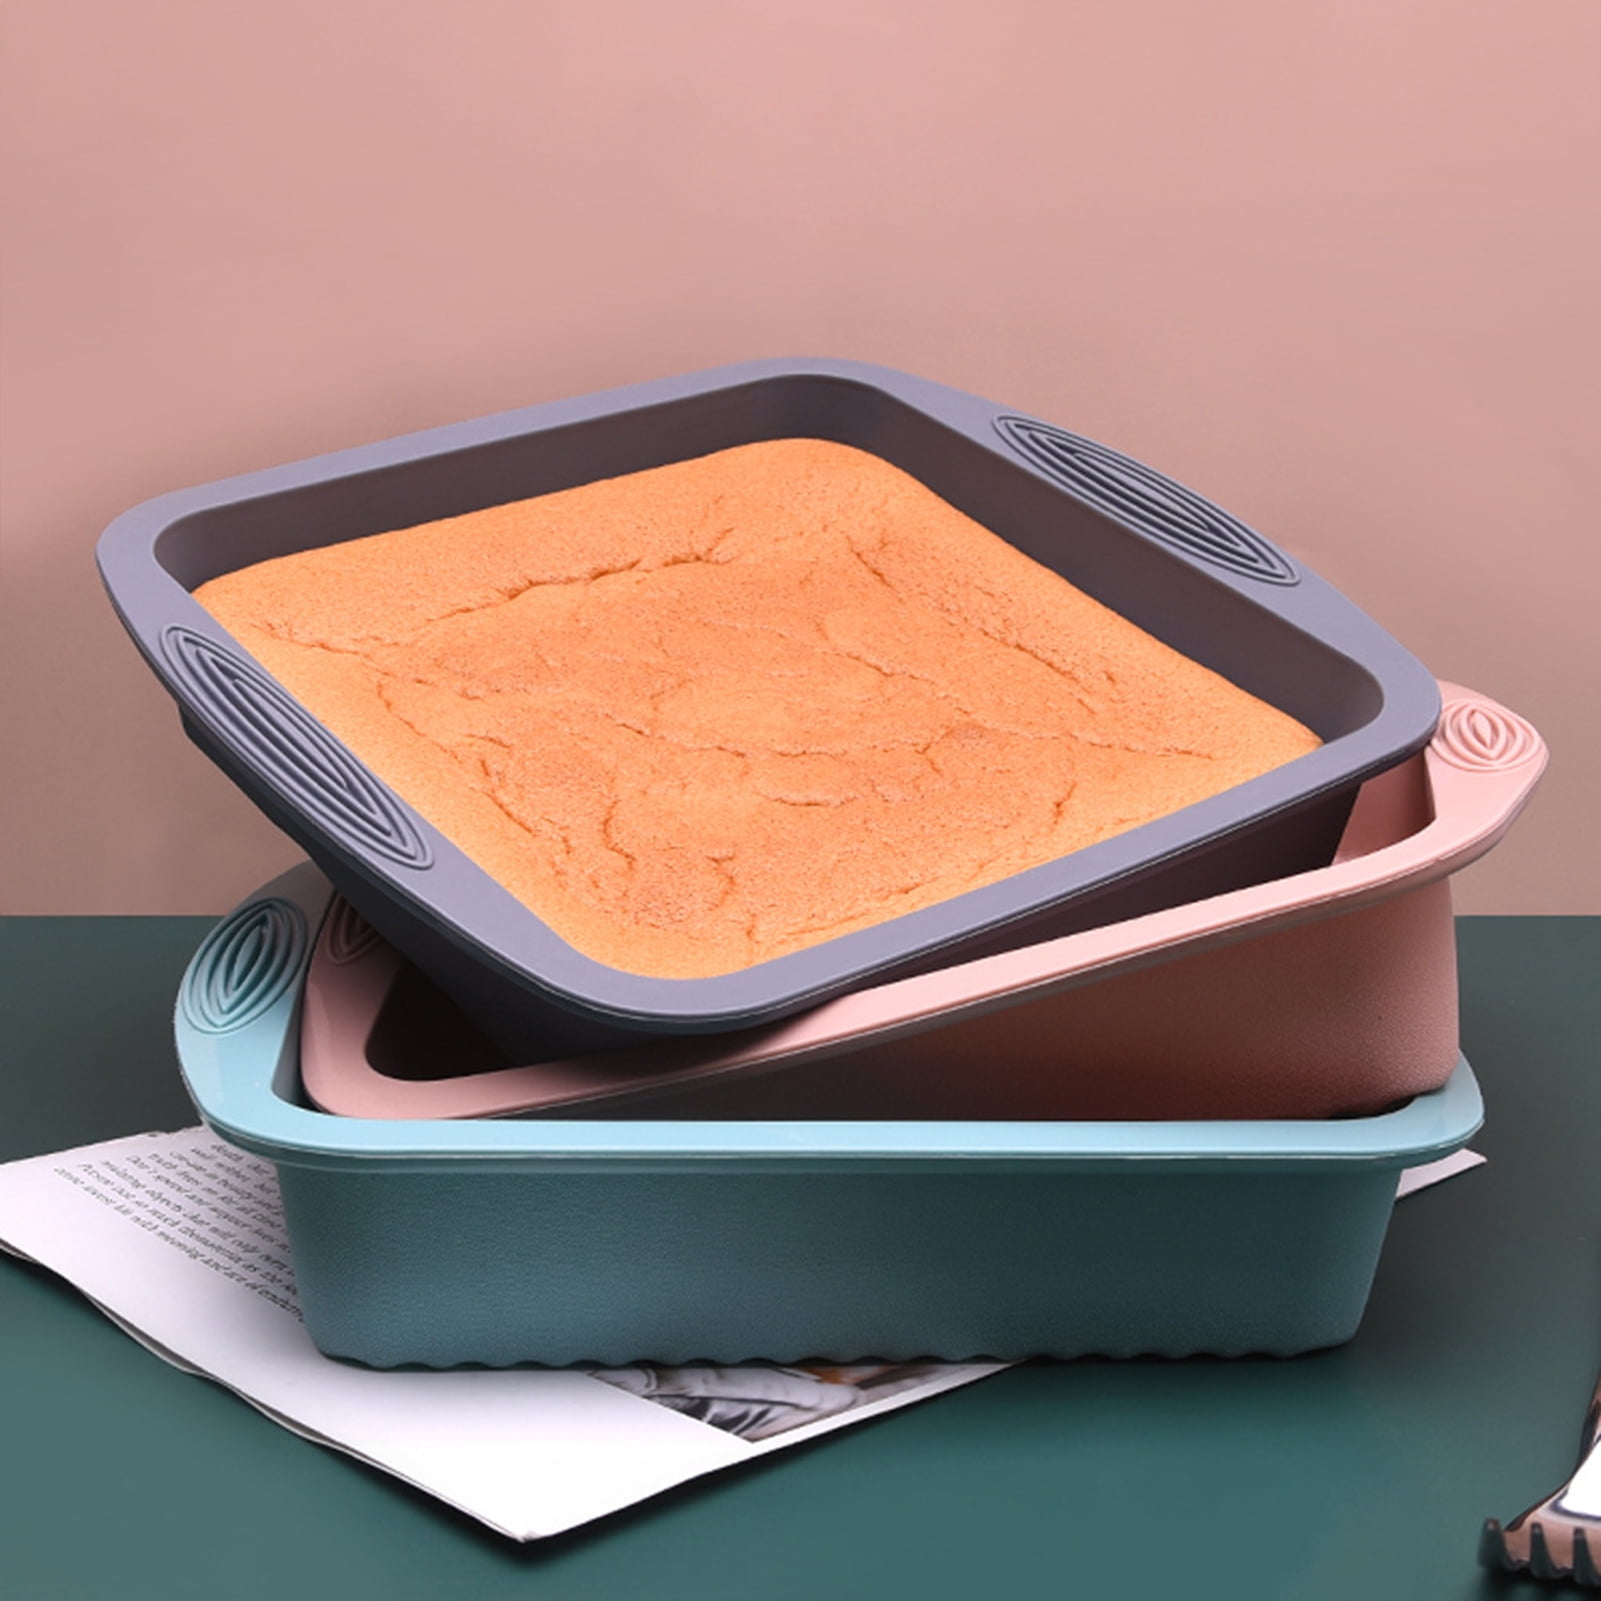 8 Metal Reinforced Silicone Square Cake Pan by Celebrate It™